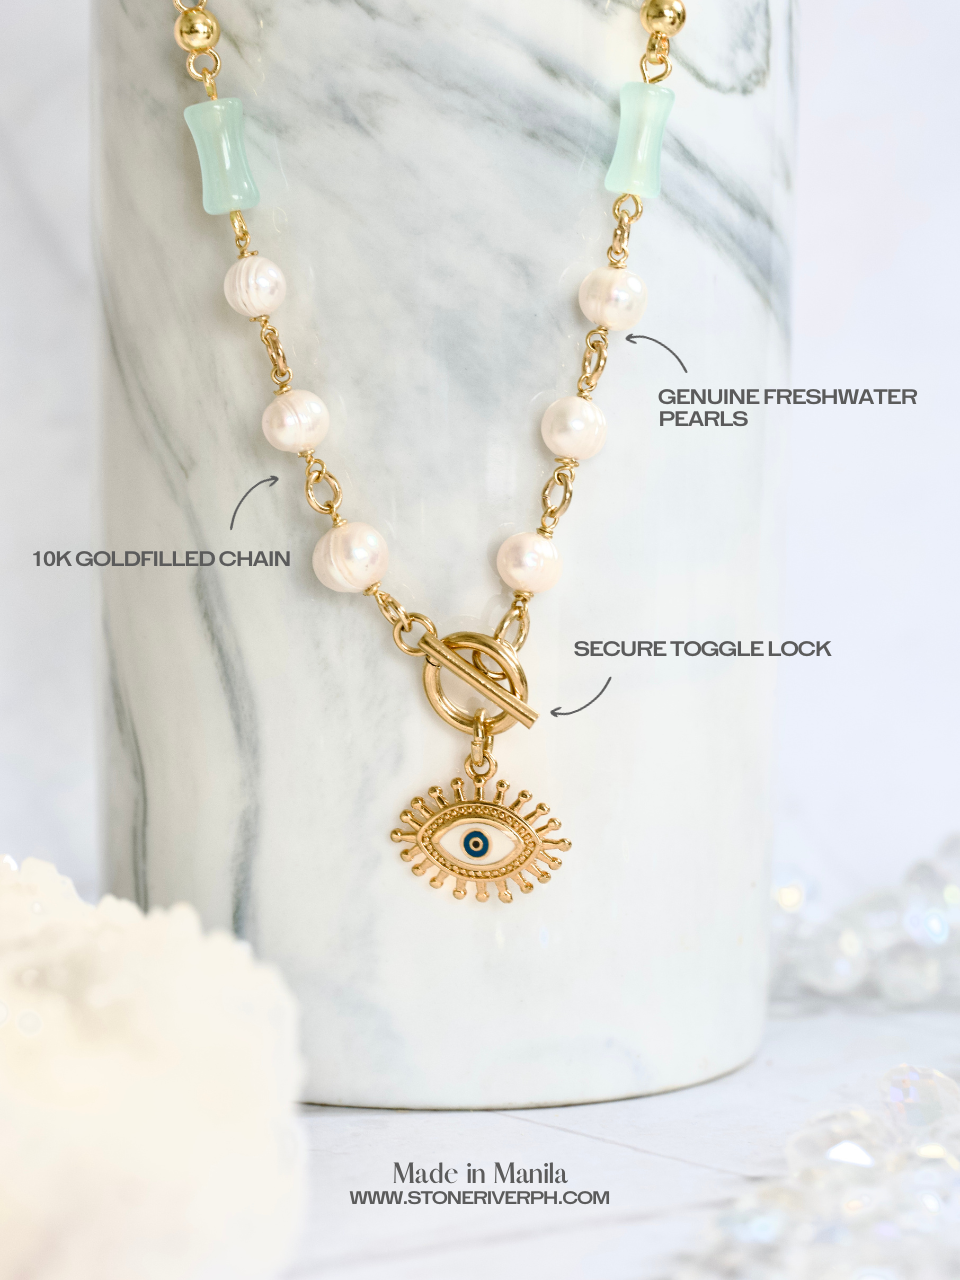 evil eye jewelry collection by stoneriver philippines. Necklaces and Chokers handmade using 10k gold filled and 18k gold plated stainless steel with crystals and freshwater pearls.